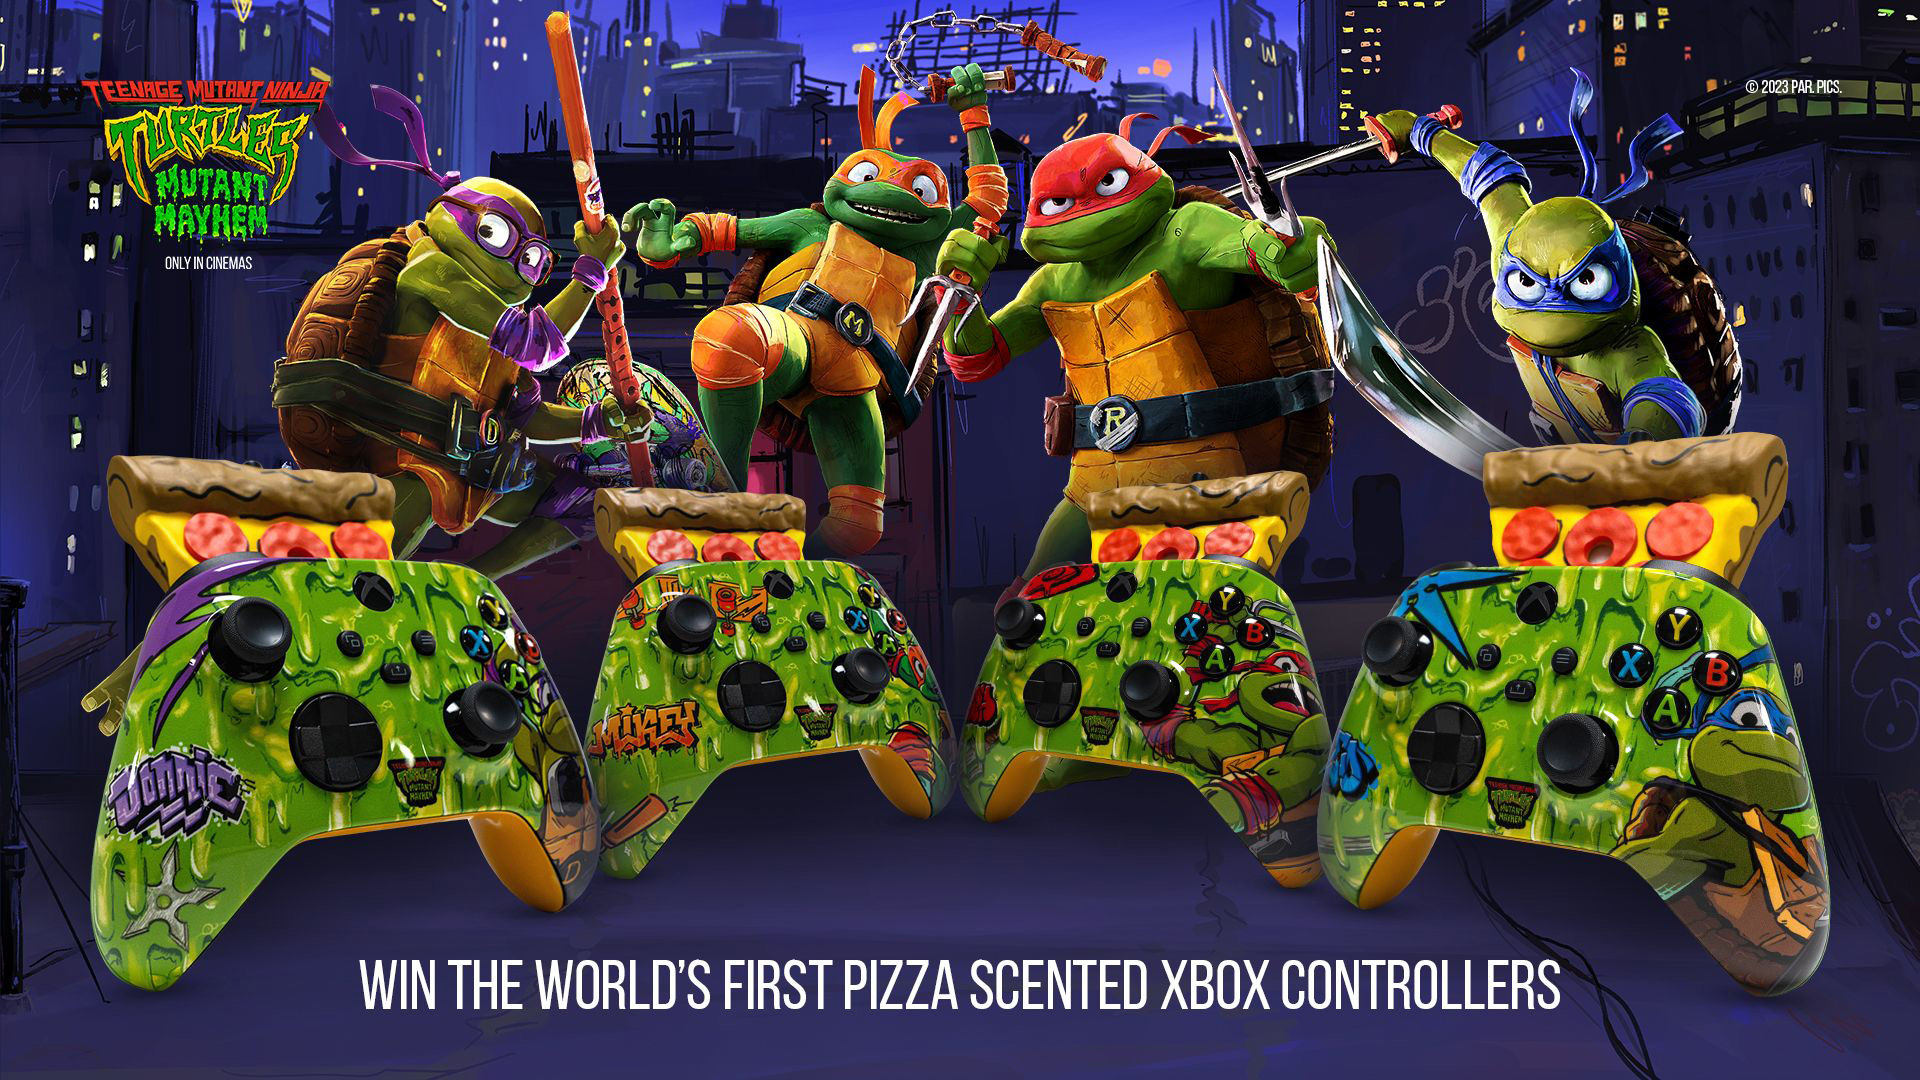 You will have a chance to win a pizza-scented Xbox Wireless Controller